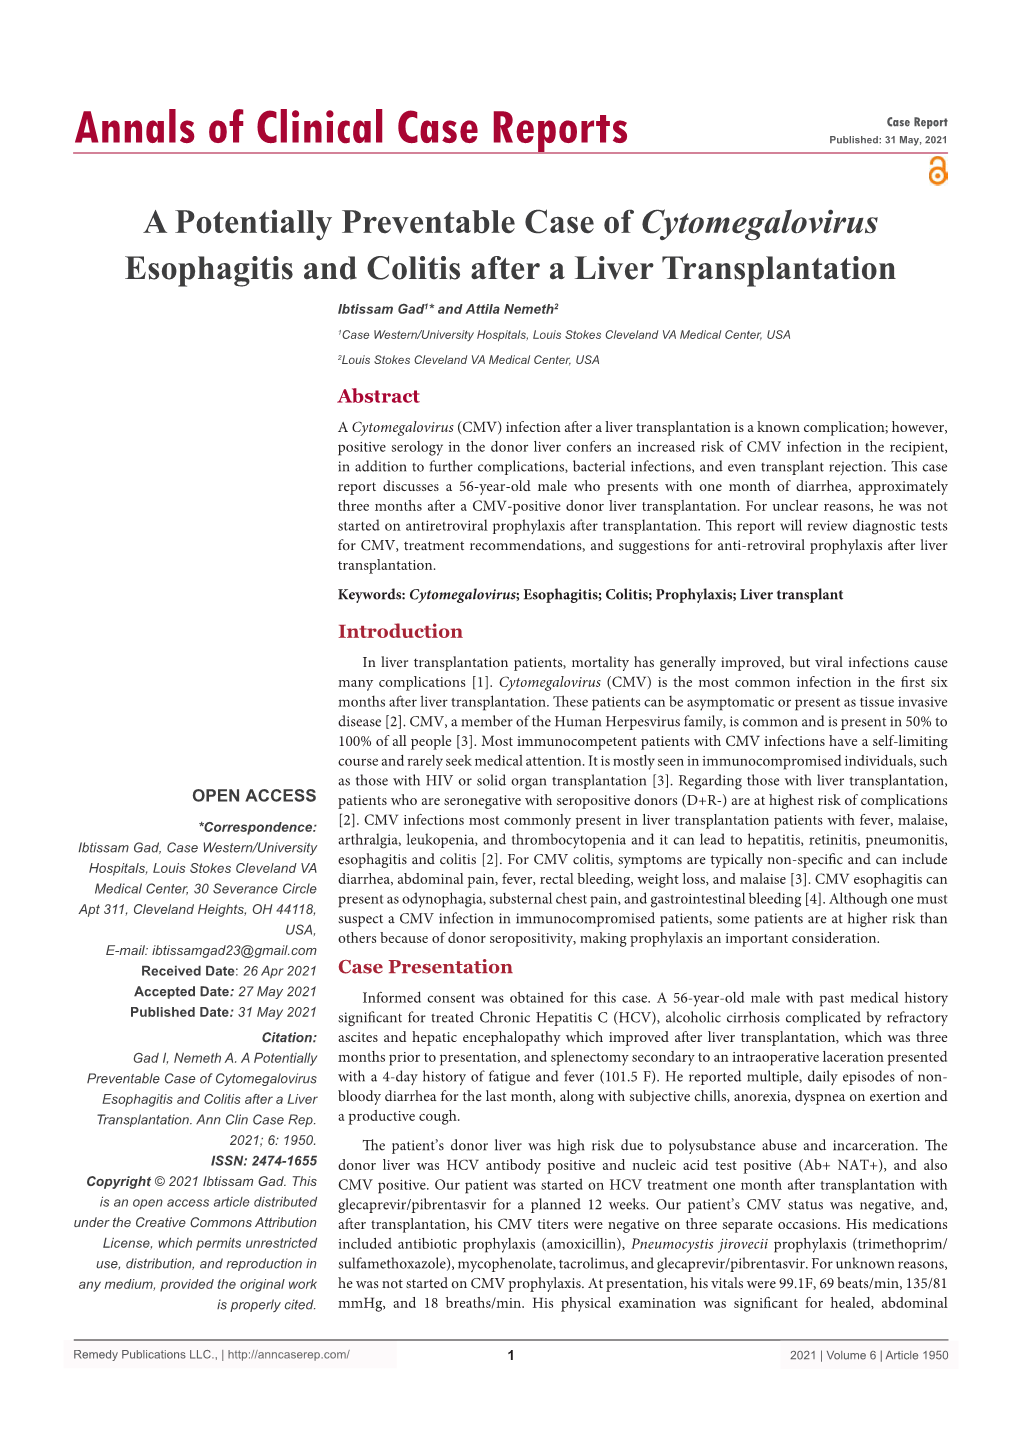 A Potentially Preventable Case of Cytomegalovirus Esophagitis and Colitis After a Liver Transplantation